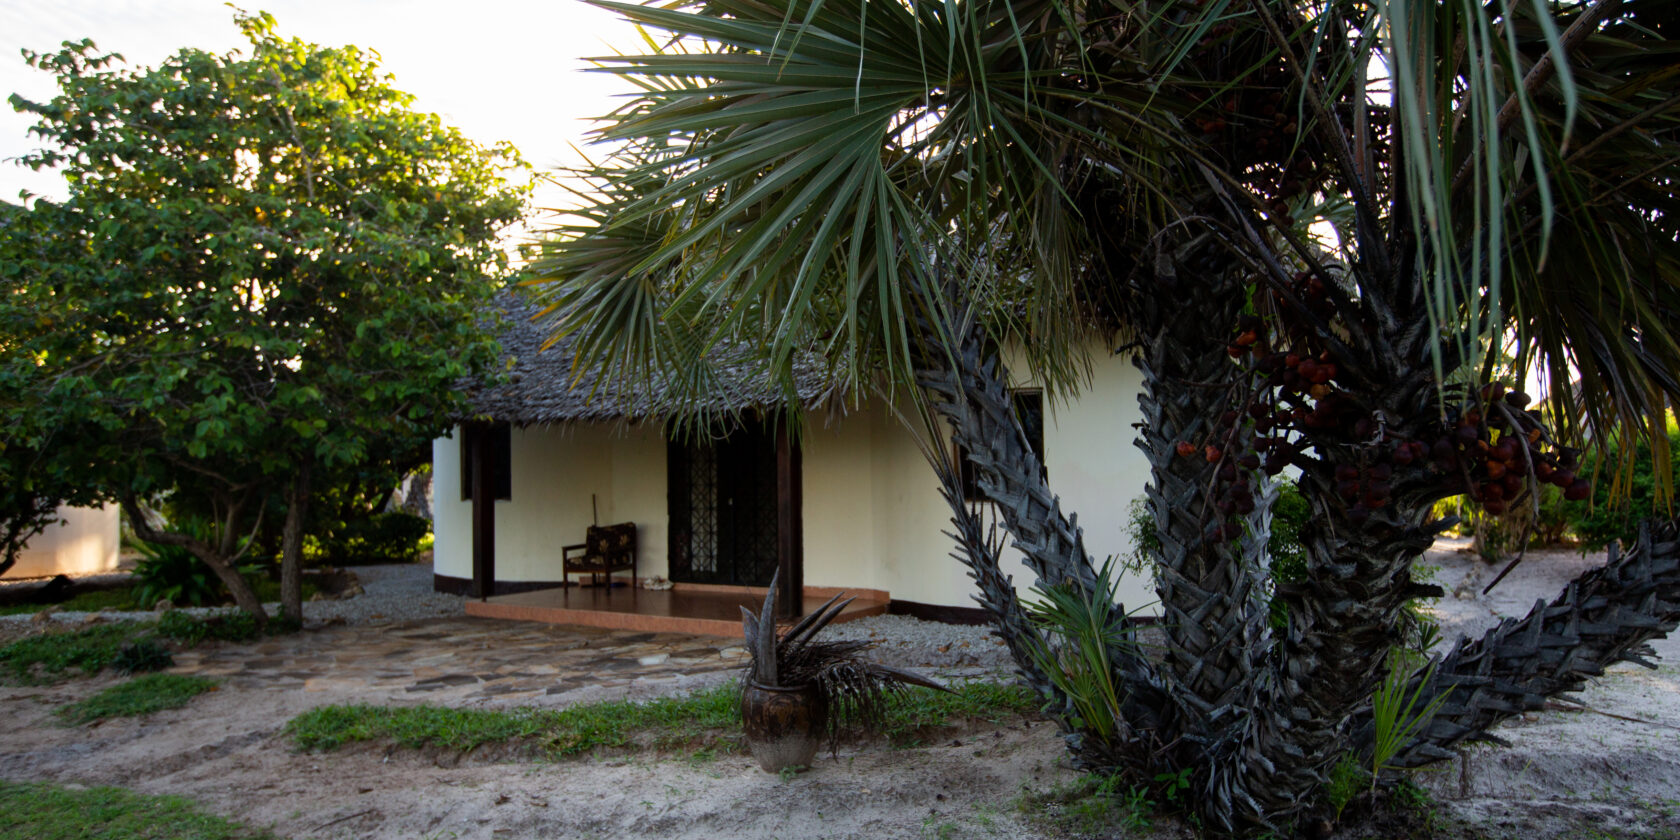 One of the bungalows at TICC, with palms and trees around